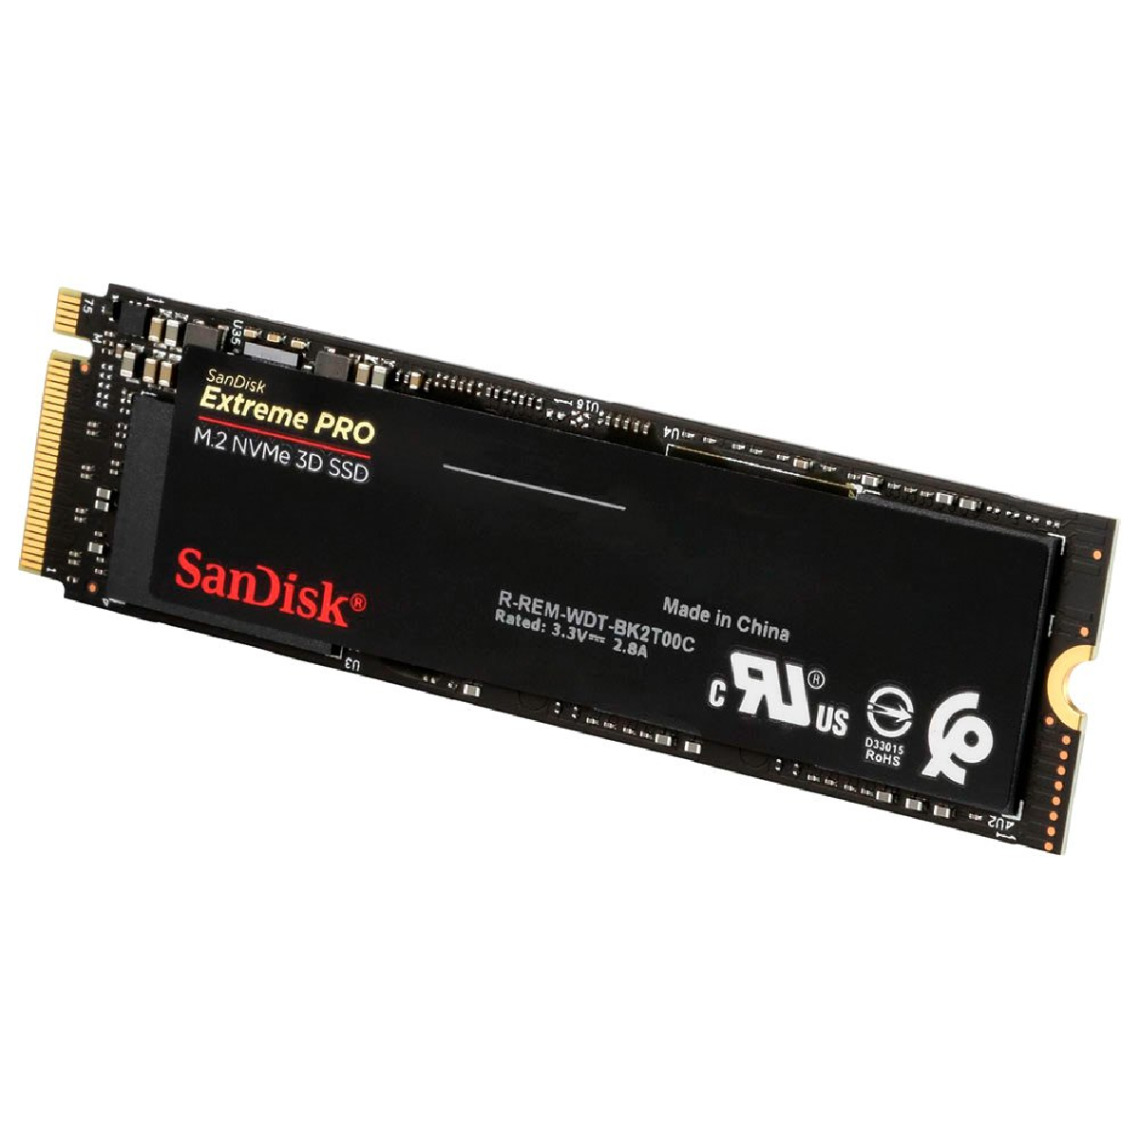 Sandisk - Extreme PRO 2 To - M.2 - PCI-Express 3.0 4x  - SSD Interne